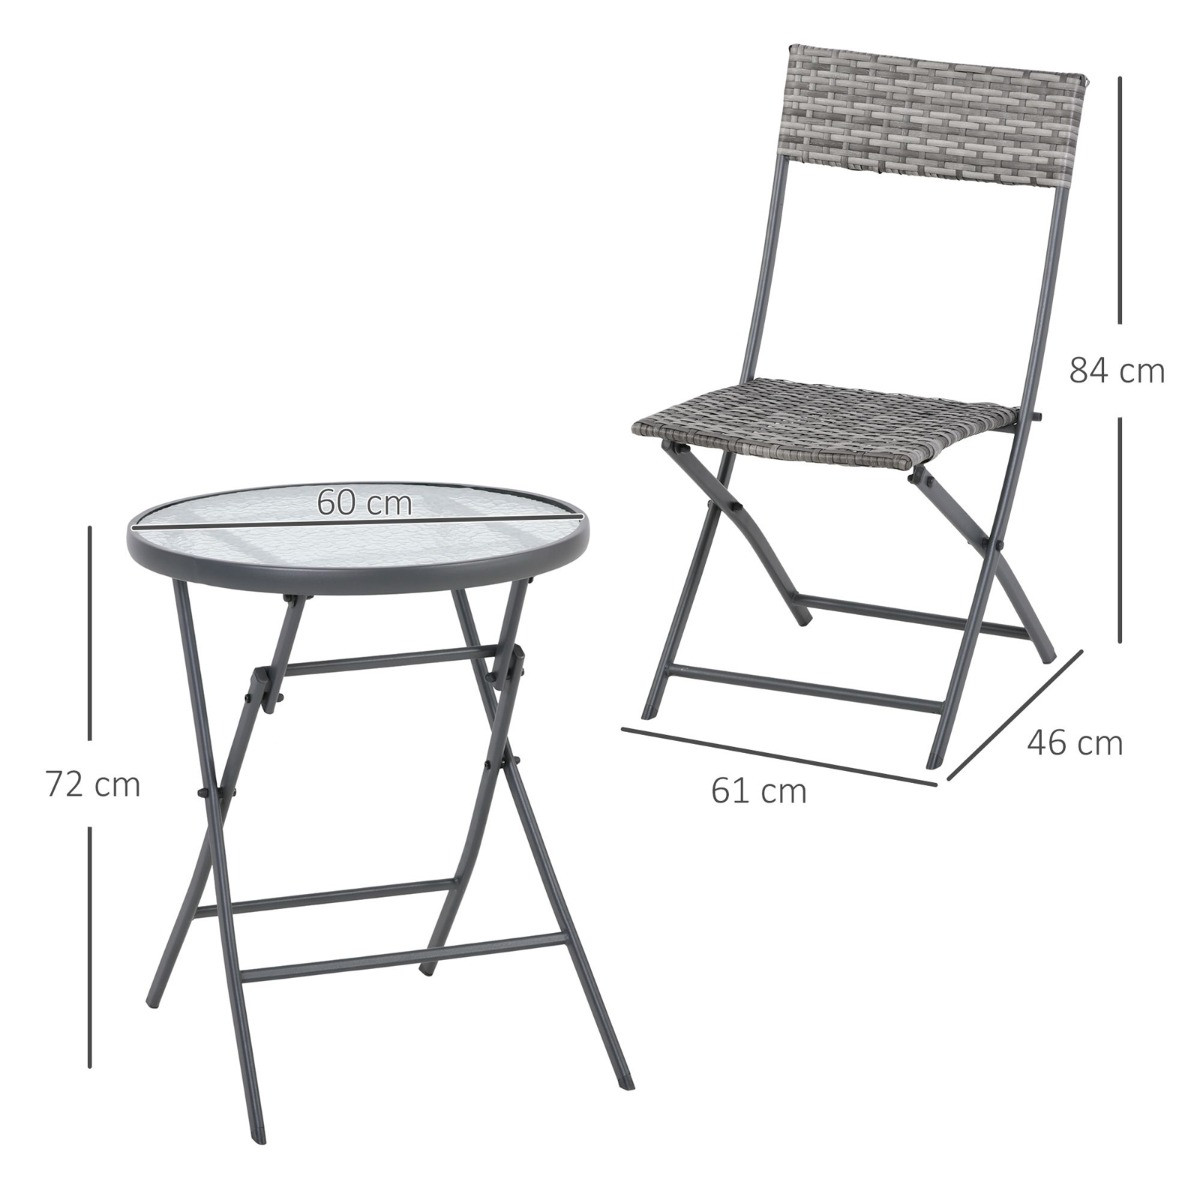 Outsunny Rattan Wicker Bistro Table And Chair Set, Grey - 3 Piece>